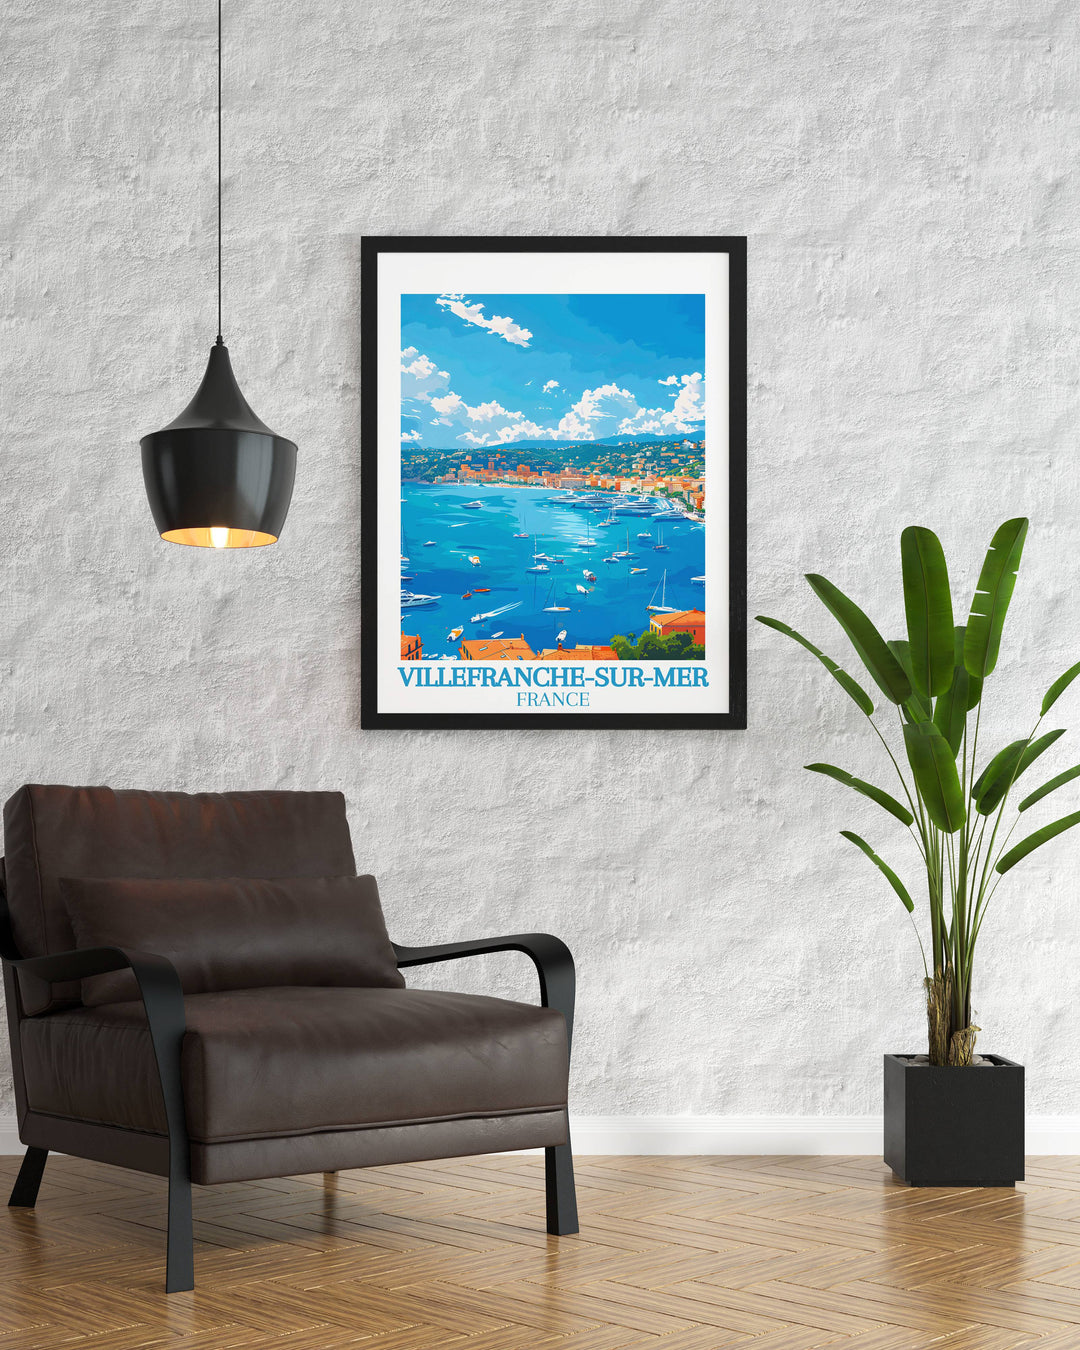 Transform your walls into a picturesque escape with this captivating Villefranche-sur-Mer print, evoking the essence of the French Riviera.